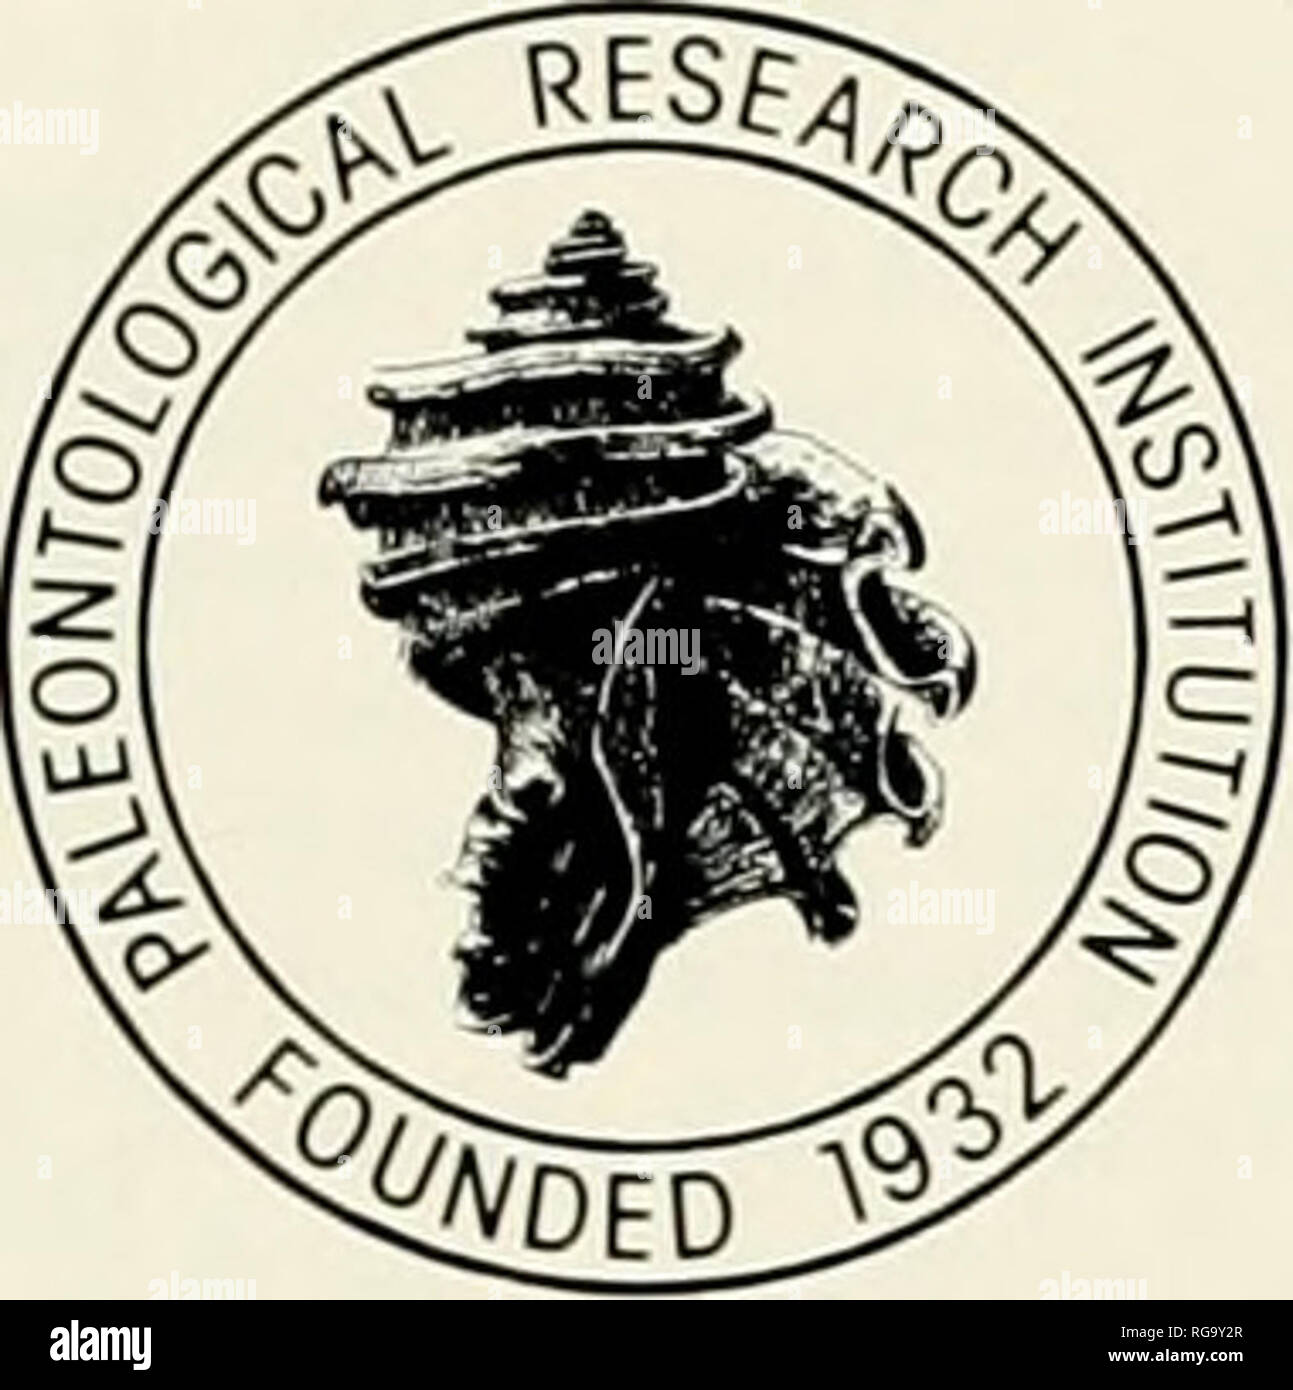 . Bulletins of American paleontology. . The Paleontological Research Institution acknowledges with special thanks the contributions of the following individuals and institutions (SI000 or more at Armand L. Adams (19761 James A. Allen (1967) American Oil Company (1976) Atlantic Richfield Company (1978) Miss Ethel Z. Bailey (1970) Christina L. Balk (1970) Mr. &amp; Mrs. Kenneth E. Caster (1967) Chevron Oil Company (1978, 1982) Exxon Company (1977 to date) Lois S. Fooelsanger (1966) Gulf Oil Corporation (1978) Merrill W. Haas (1975) Mr. &amp; Mrs. Phi PATRONS ihe discretion of the contributor) Re Stock Photo